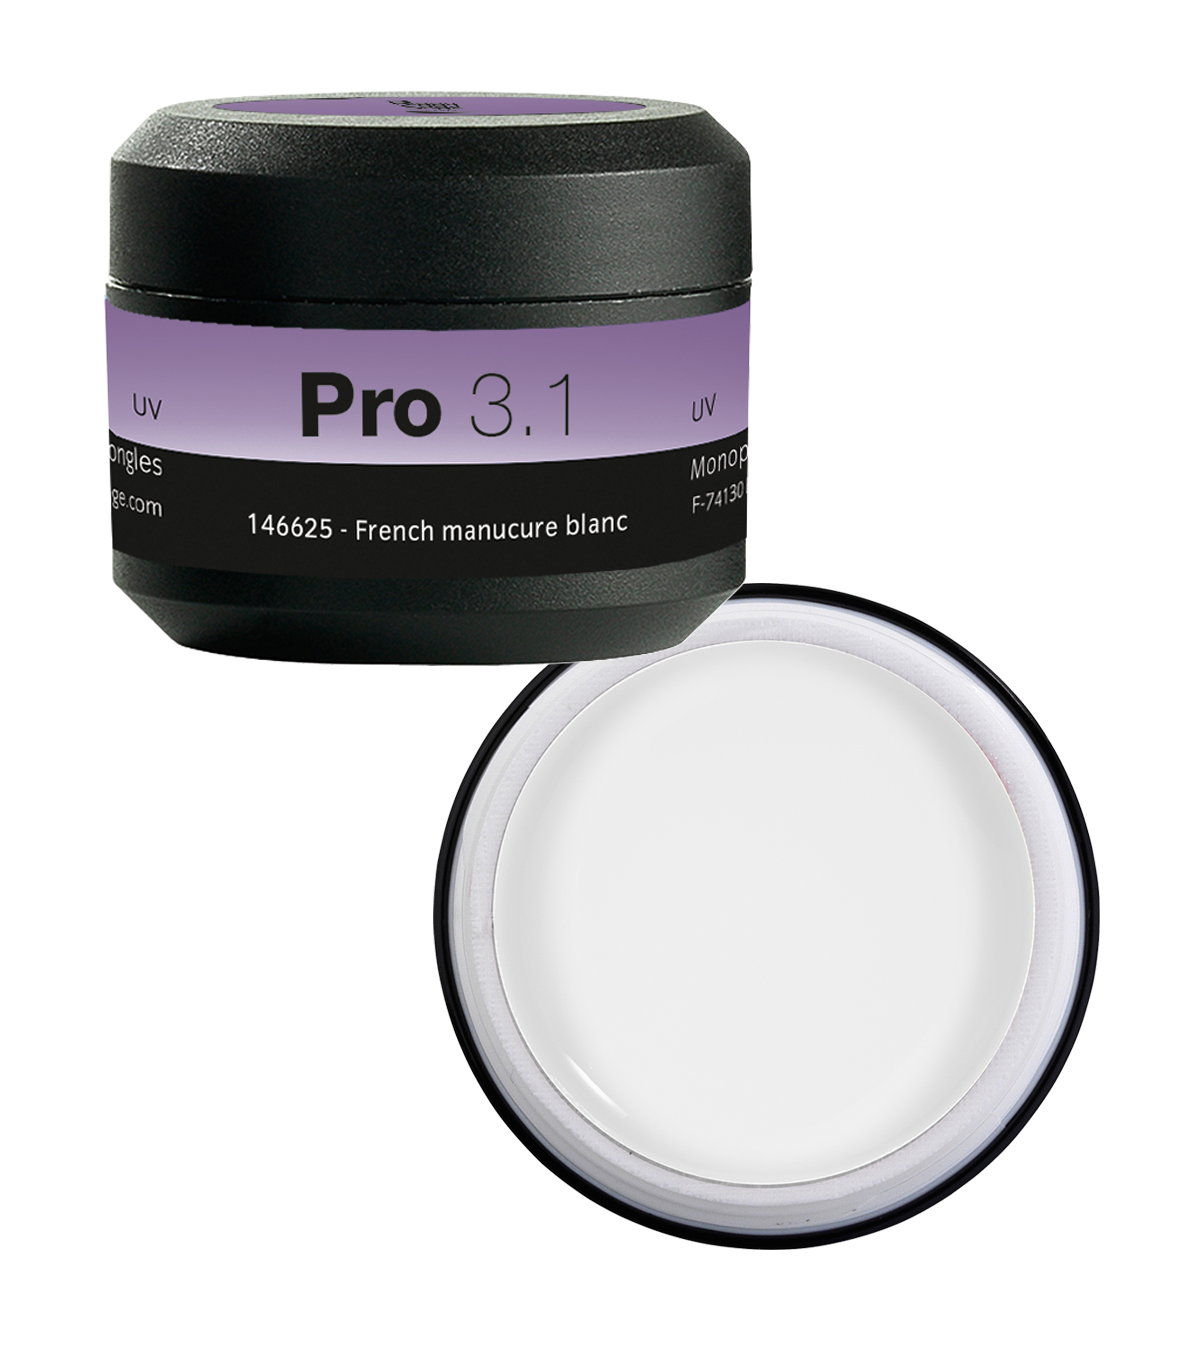 PS Pro 3.1 Gel French manucure blanc